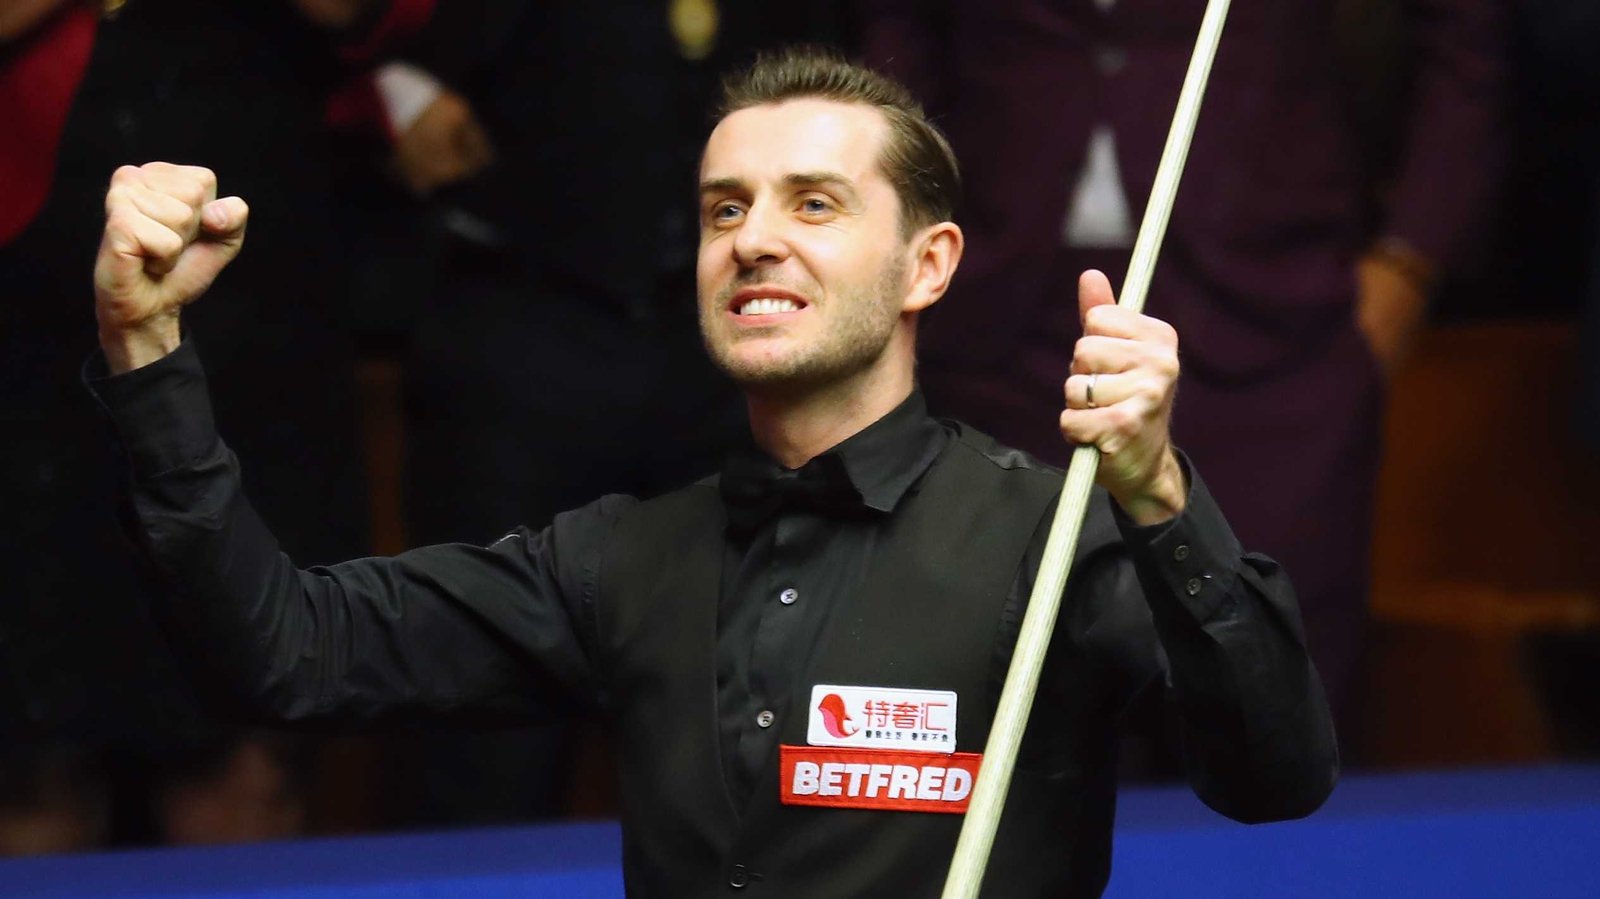 Awards keep coming for world champion Selby